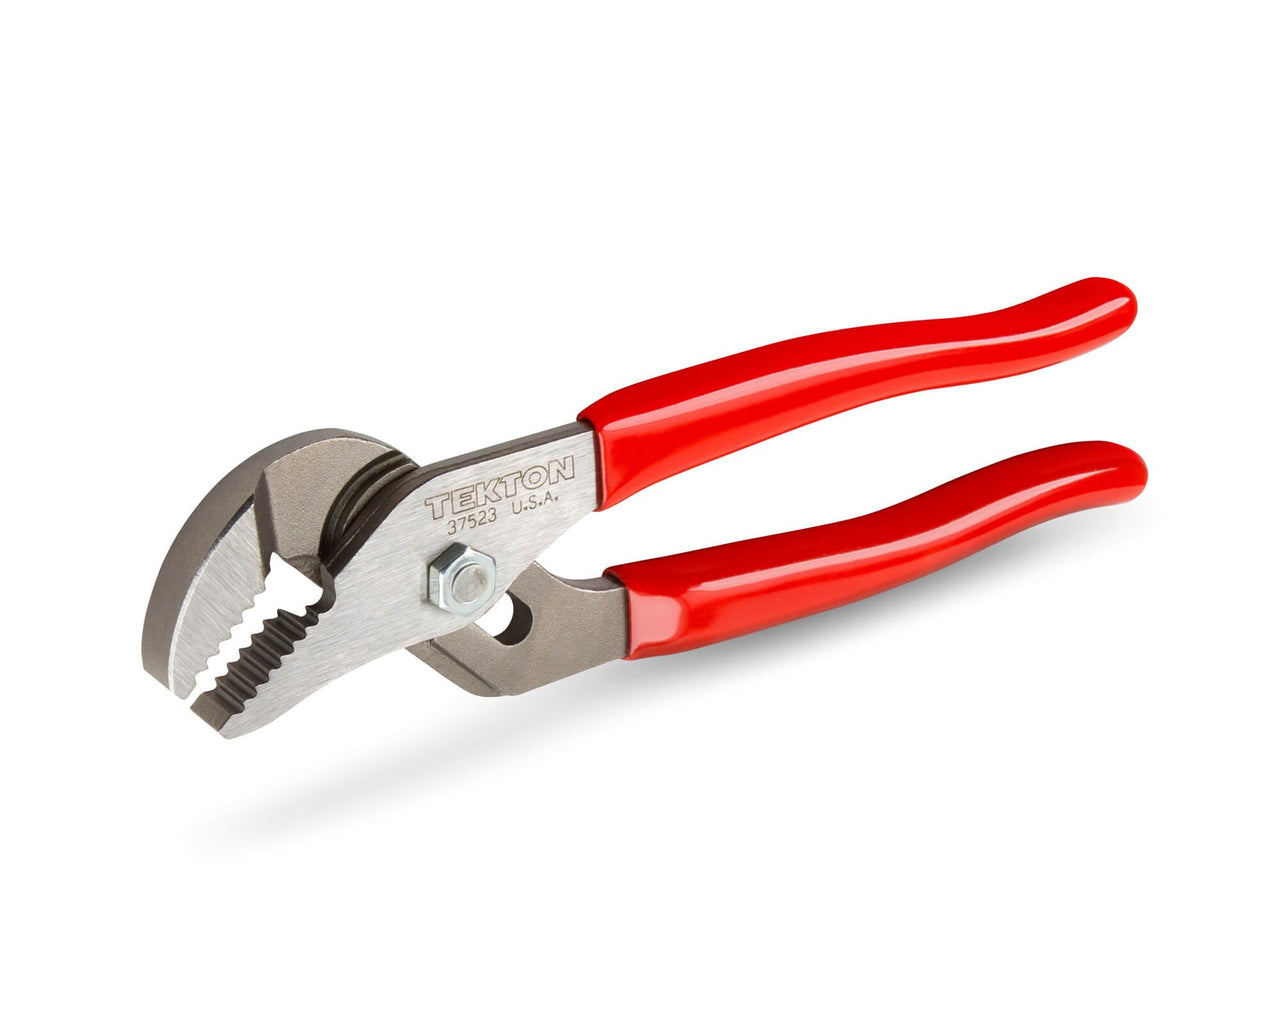 Tekton 37523 7-Inch USA Groove Joint Pliers, 1 in. Jaw Capacity